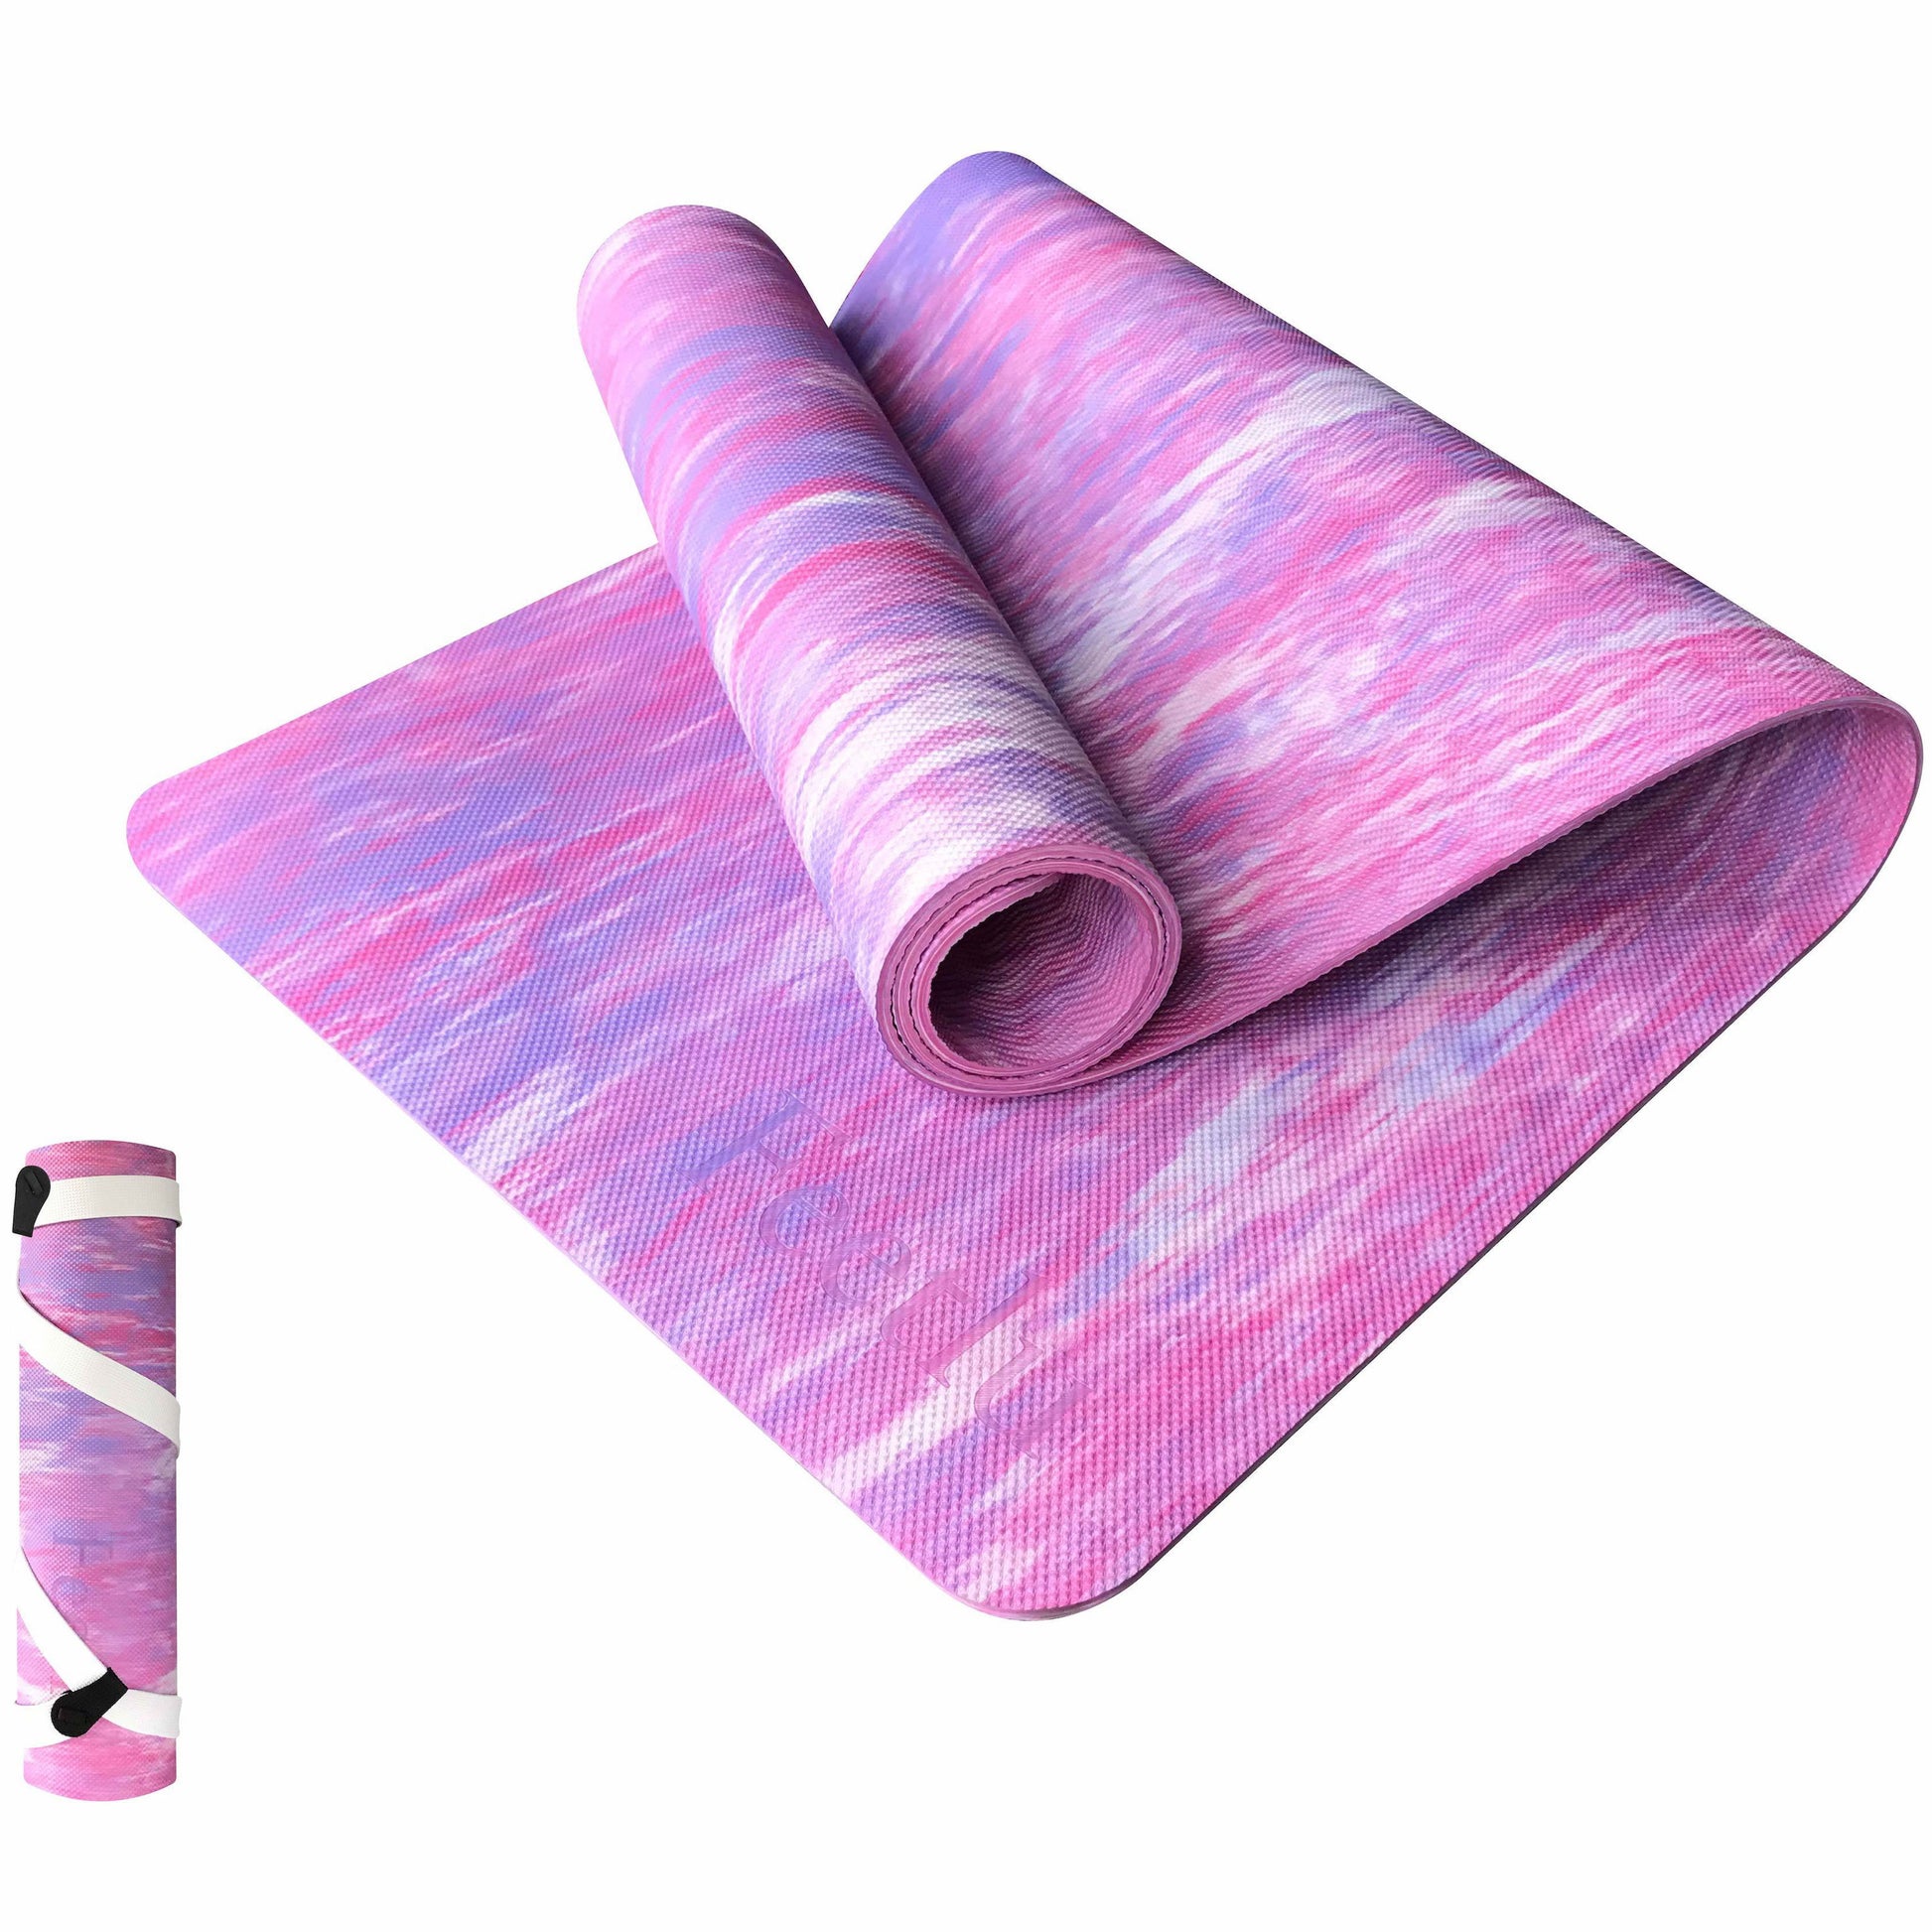 Extra Thick Yoga Mat, Pink and Purple Yoga Mat